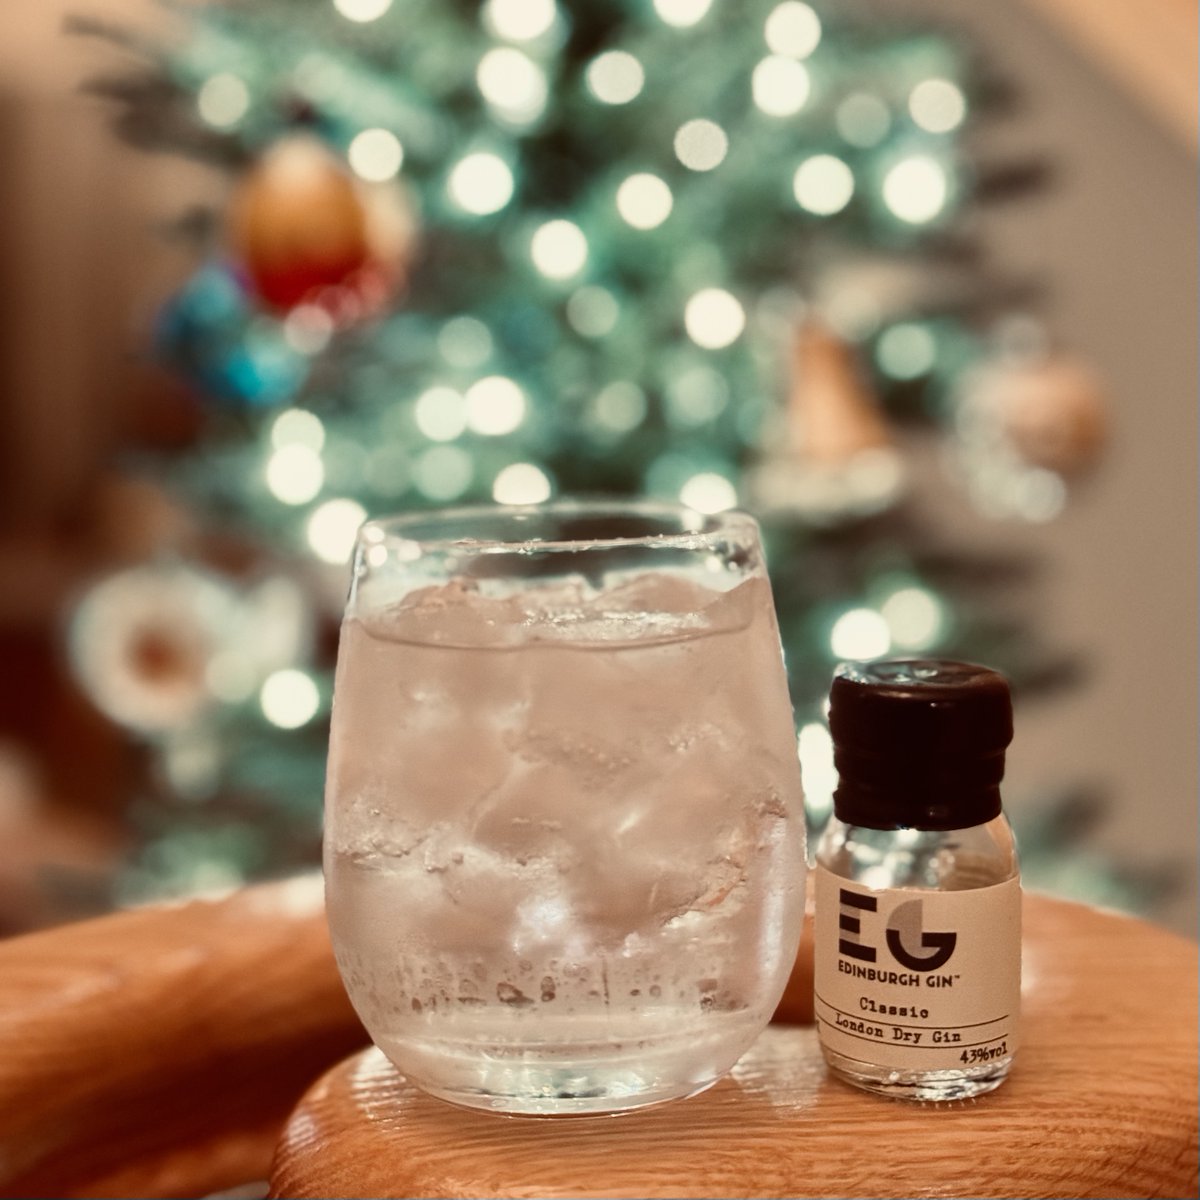 @SuntoryGlobal @Kyrodistillery @FeverTreeMixers @No3Gin Day 21 of #ginvent : Edinburgh Gin Classic by @Edinburgh_Gin 

On a little run of London Dry in this calendar, and this gin delivers a good juniper at the start with a nice citrus finish.  I didn't get the lavender in this dram, and would like to try some more in the future to